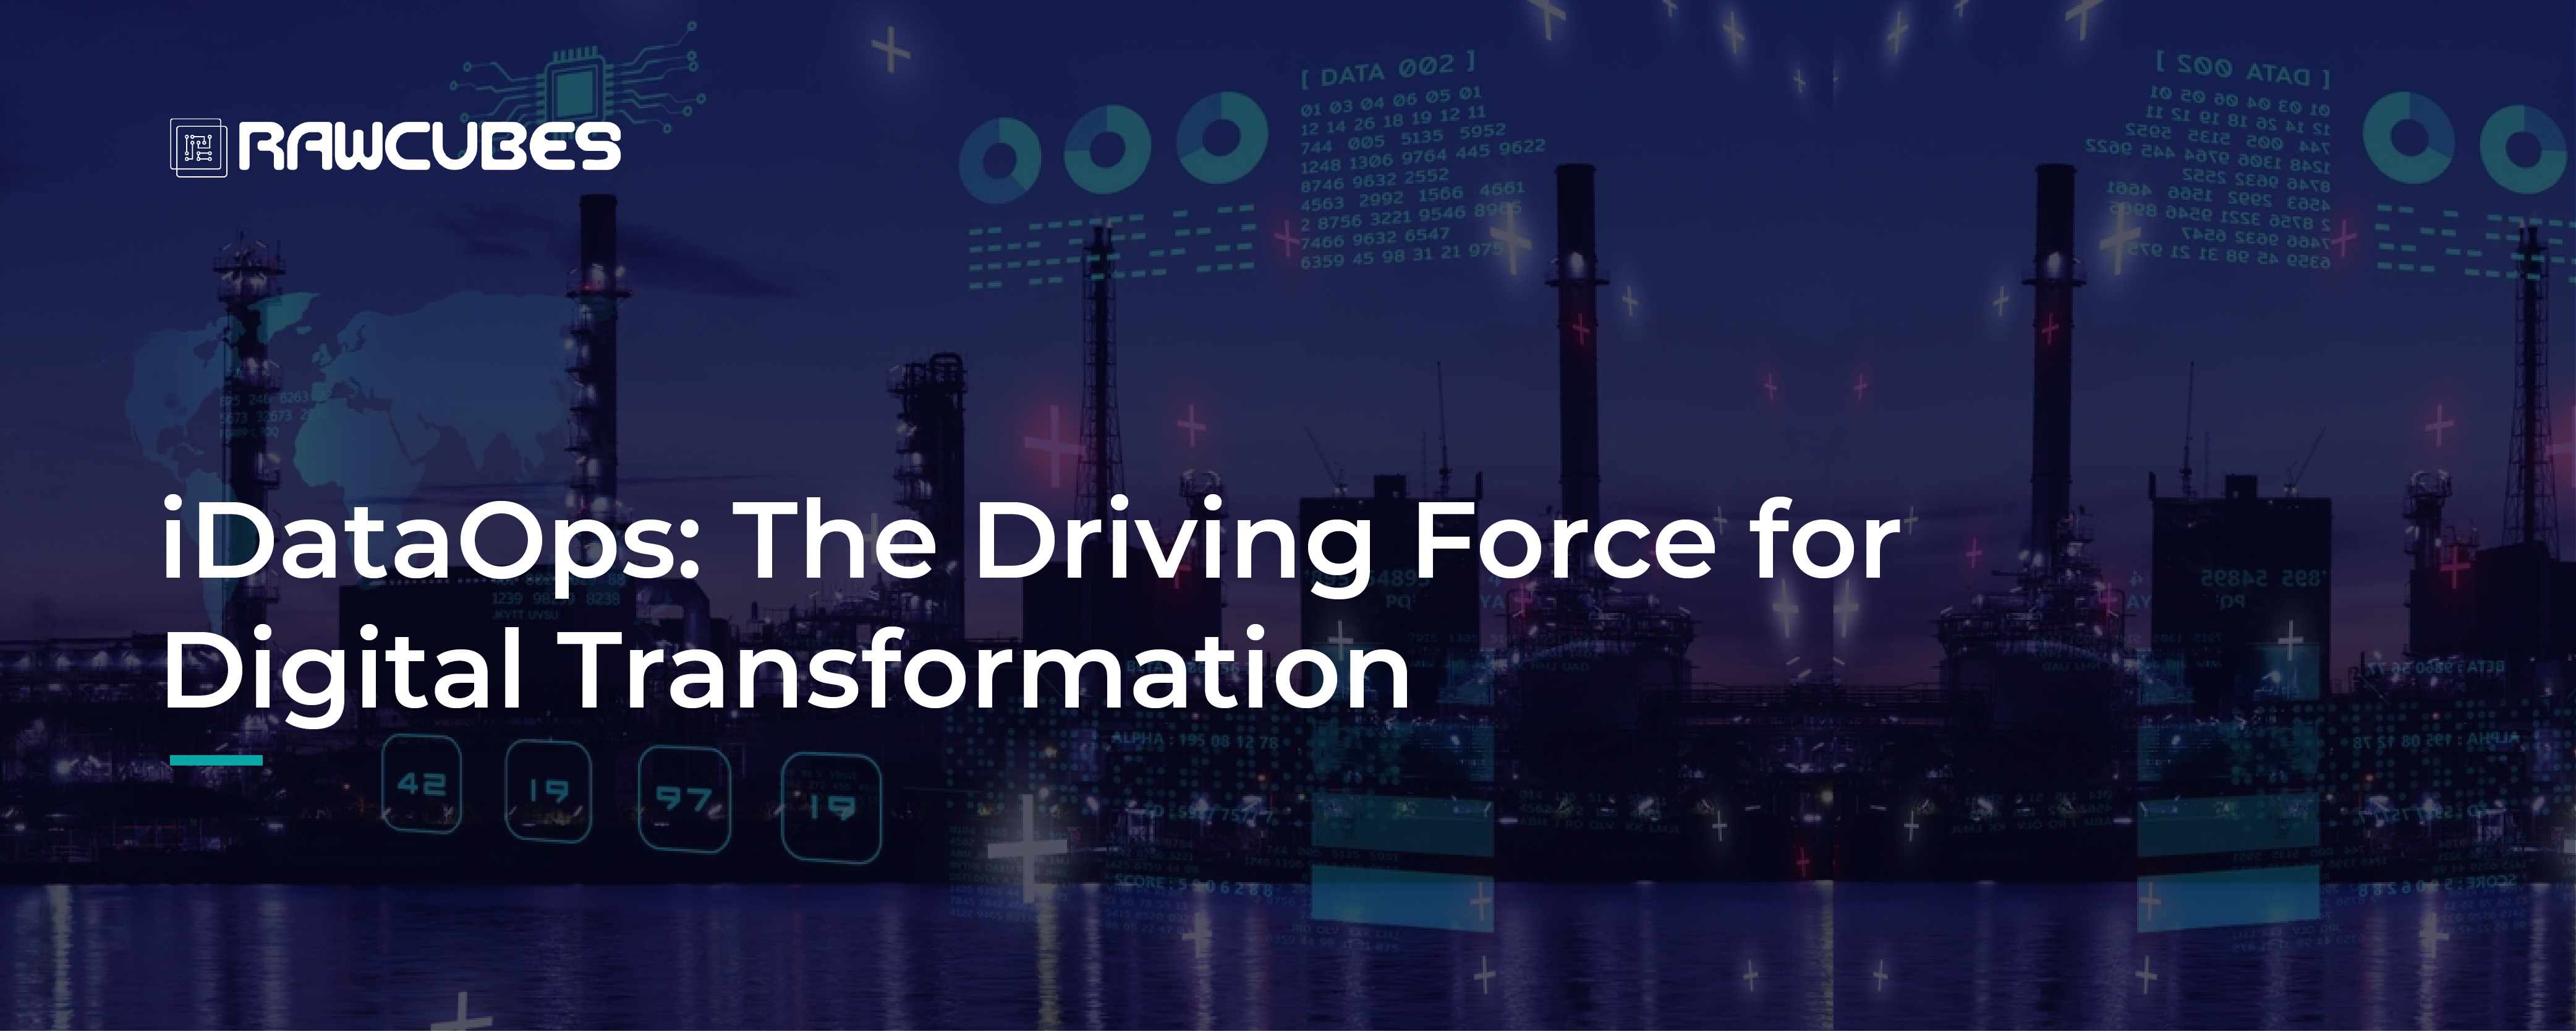 the driving force for digital transformation